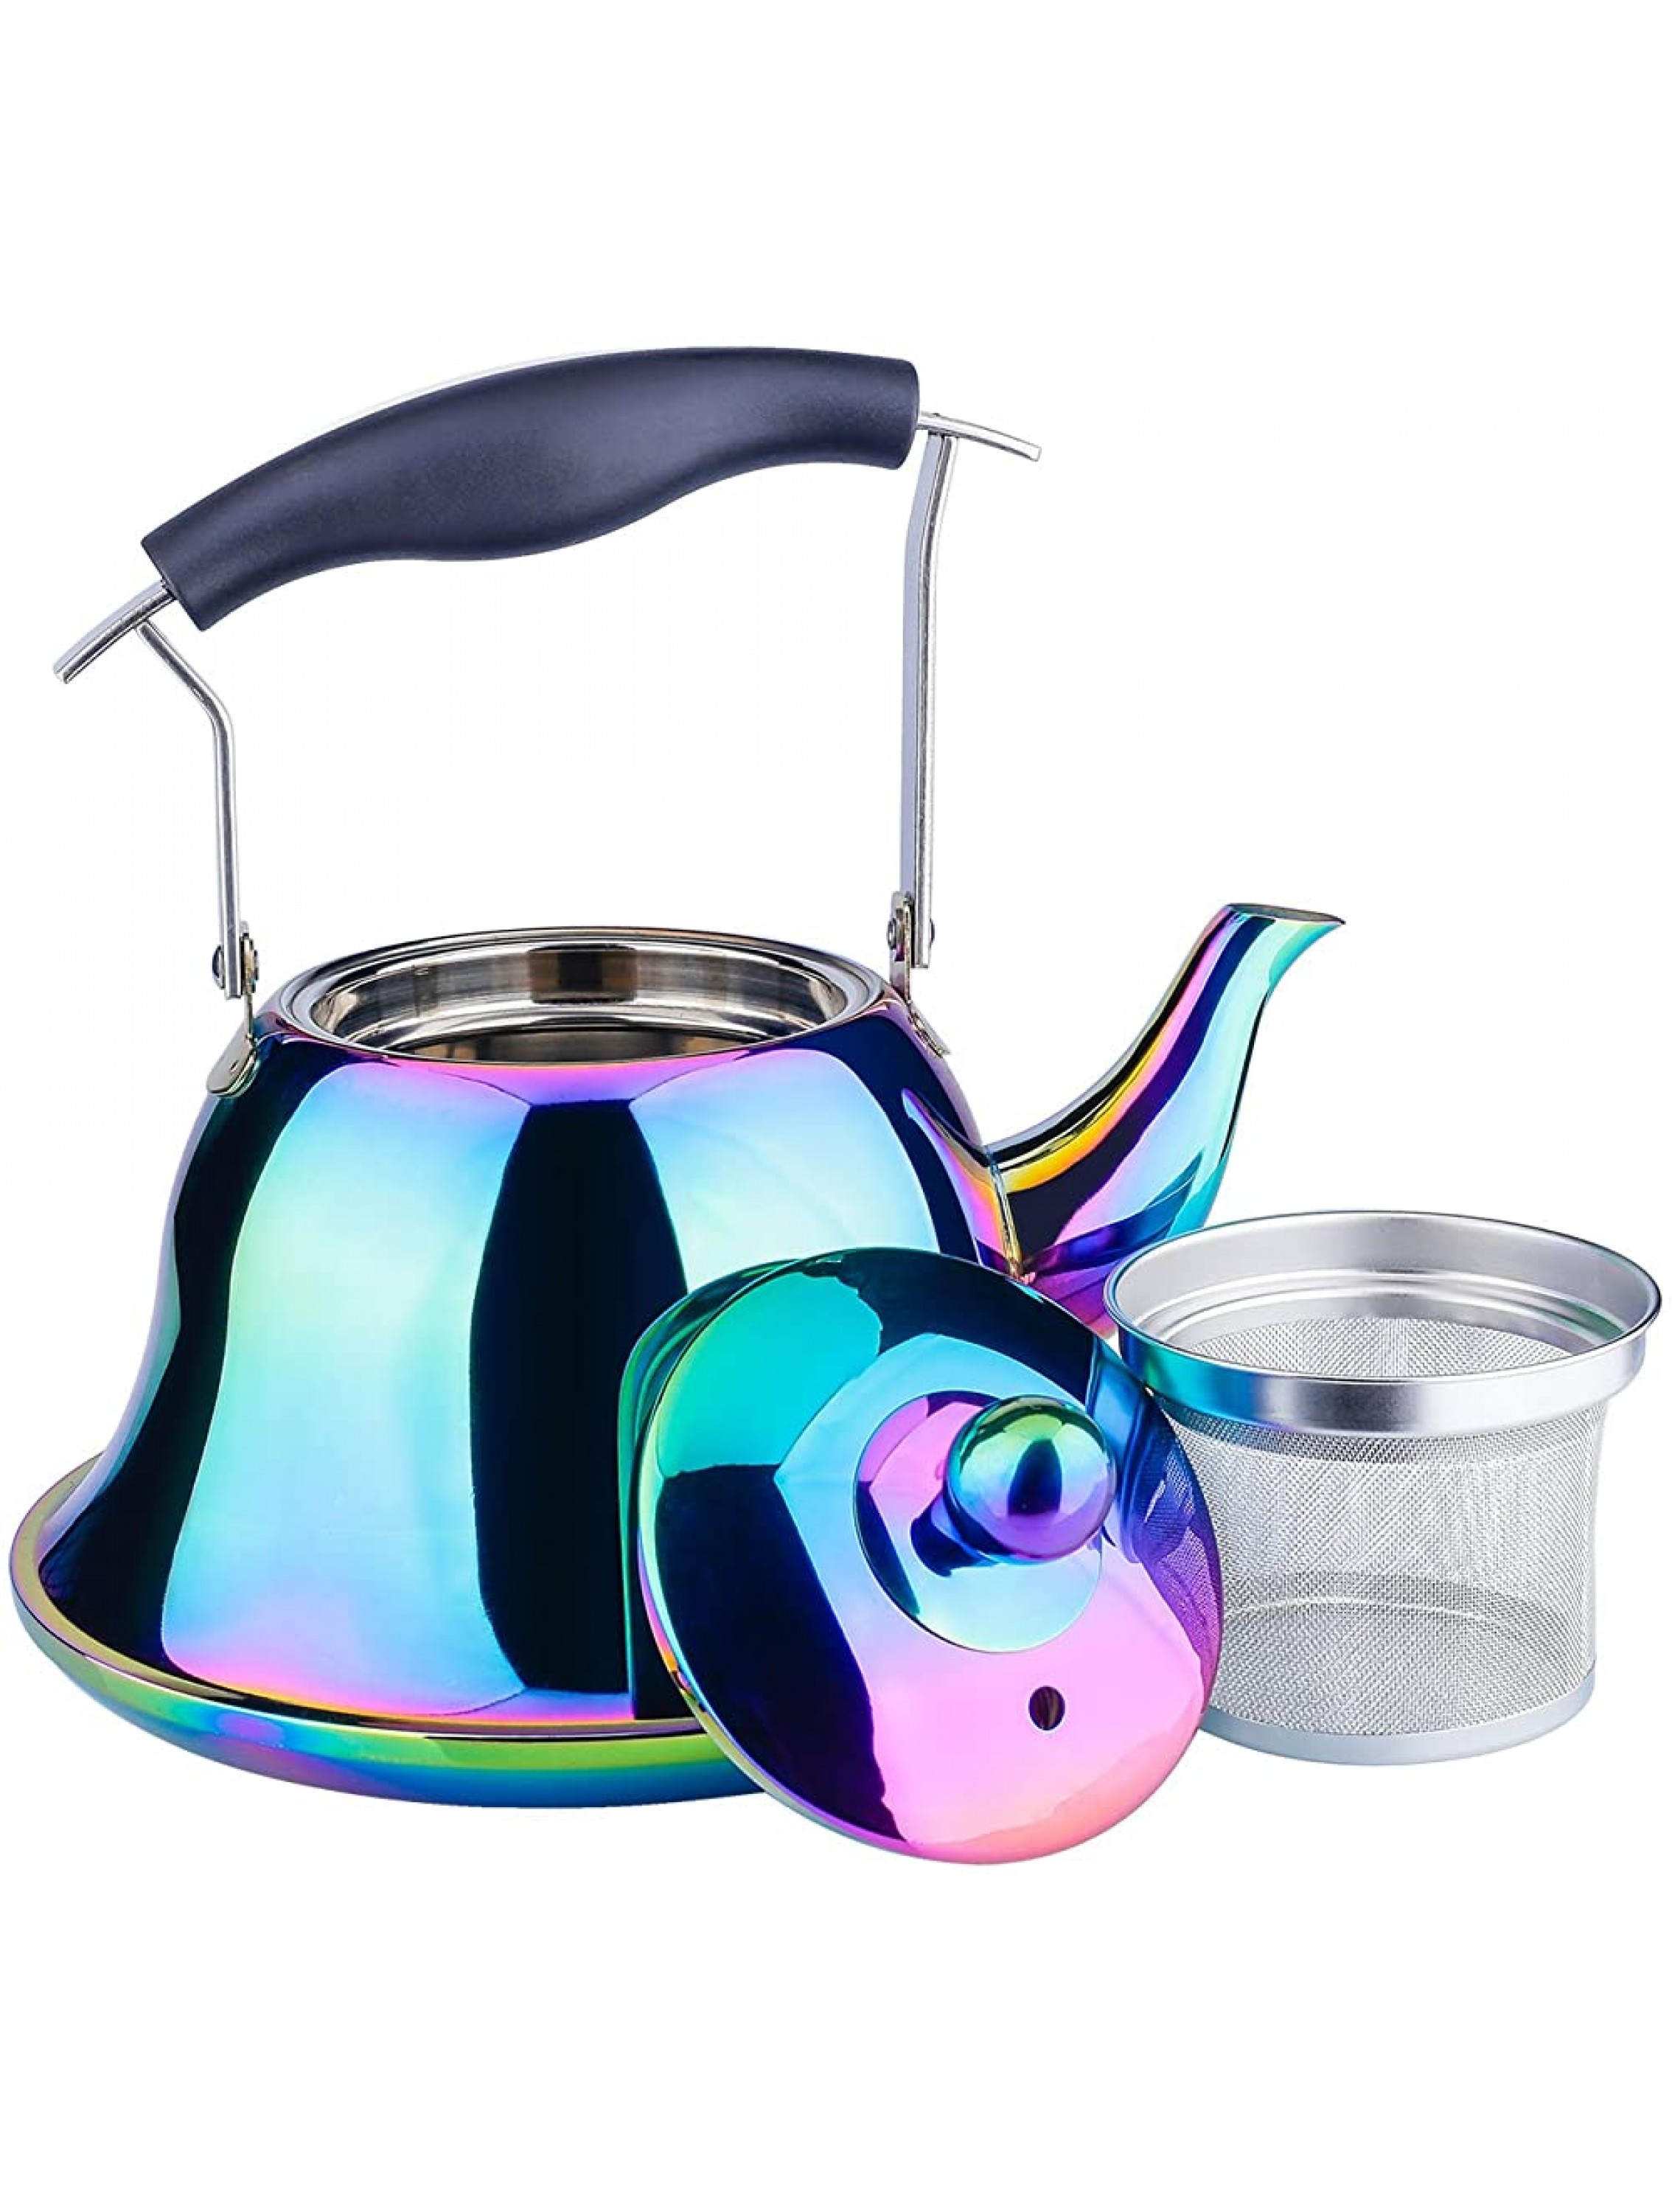 Onlycooker Whistling Tea Kettle Stainless Steel Stovetop Teakettle with Infuser Sturdy Teapot for Tea Coffee Fast Boiling Color Rainbow Mirror Finish 2 Liter 2.1 Quart - BGDDX4C45